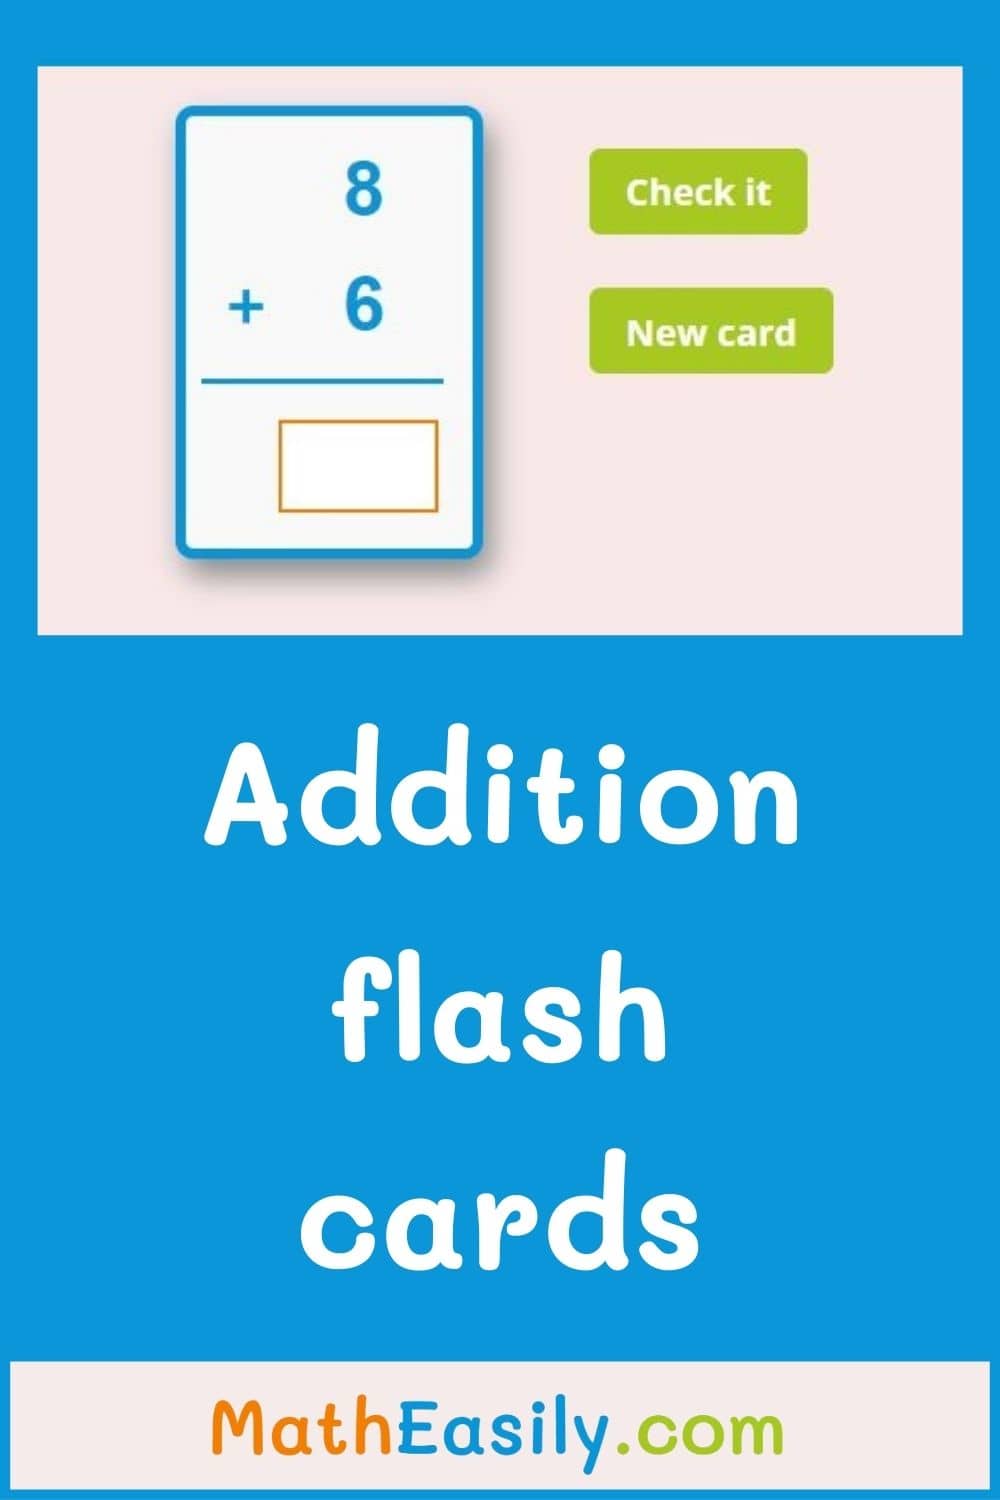 Free online addition flashcards to 20. Math addition flash cards online free. Math addition cards to 20. 
Math flash cards addition to 20. flash cards addition.